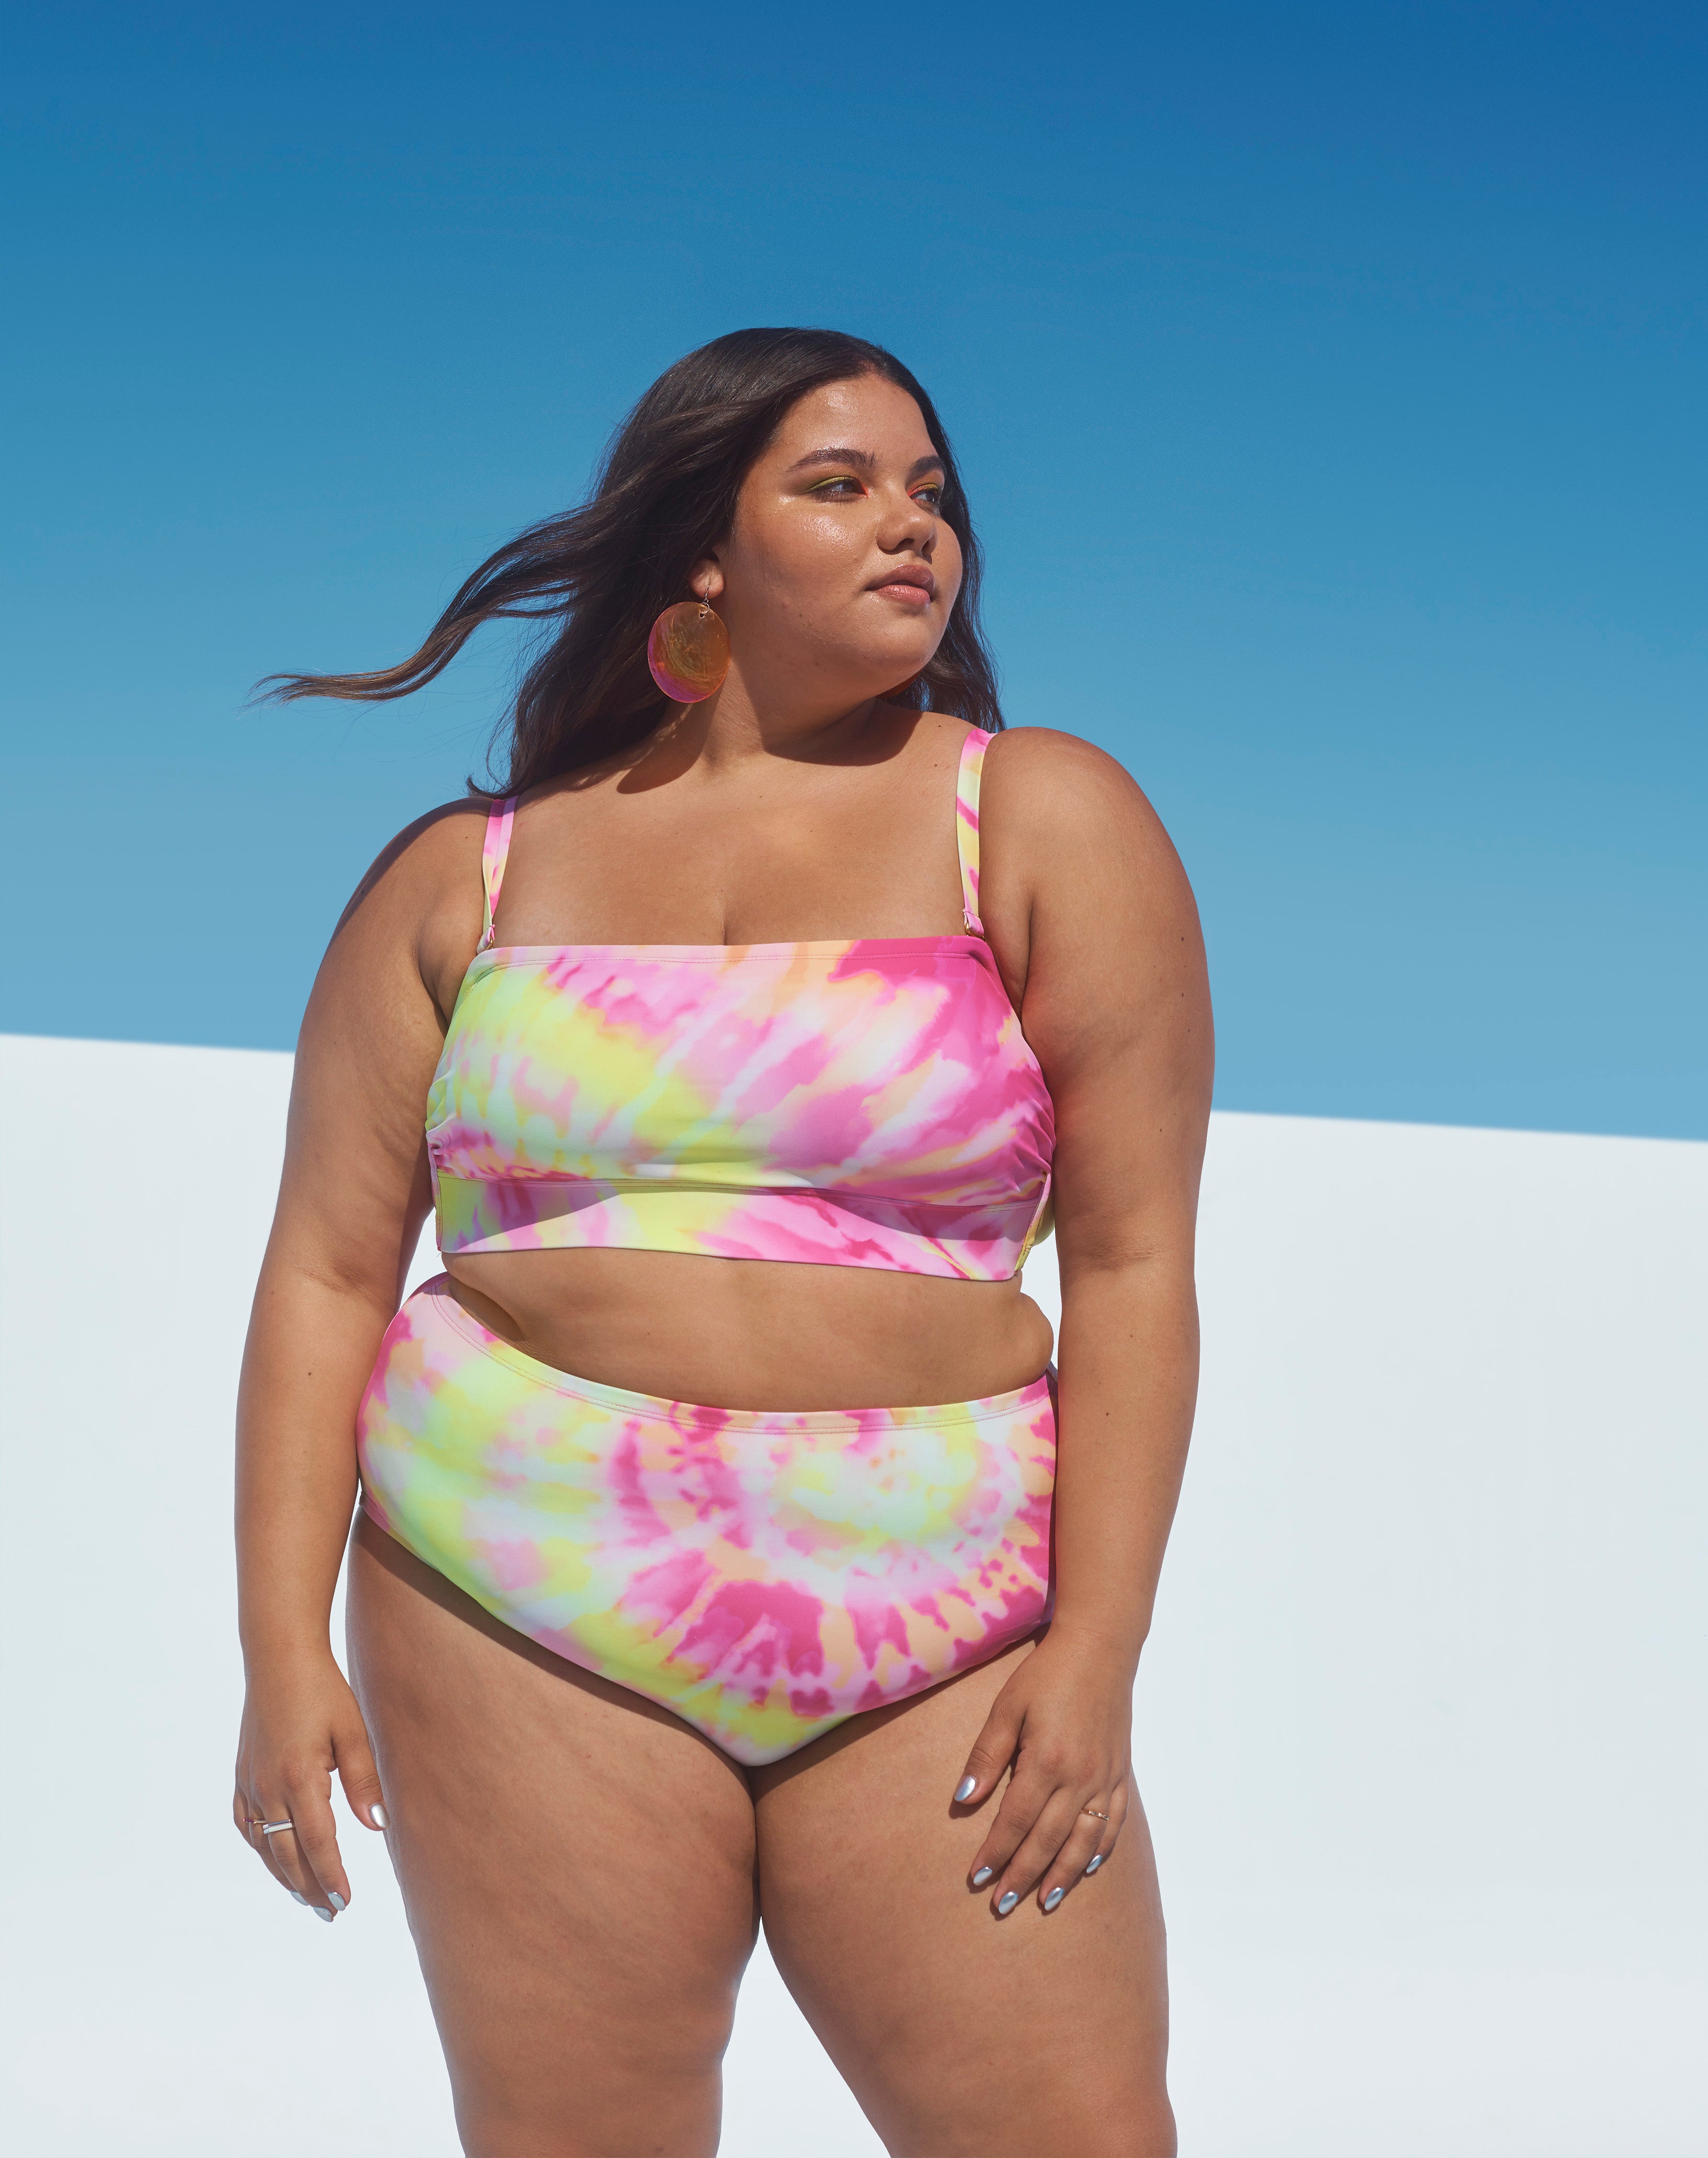 Target Launches 1,800 New Swimsuit Styles Winter 2020